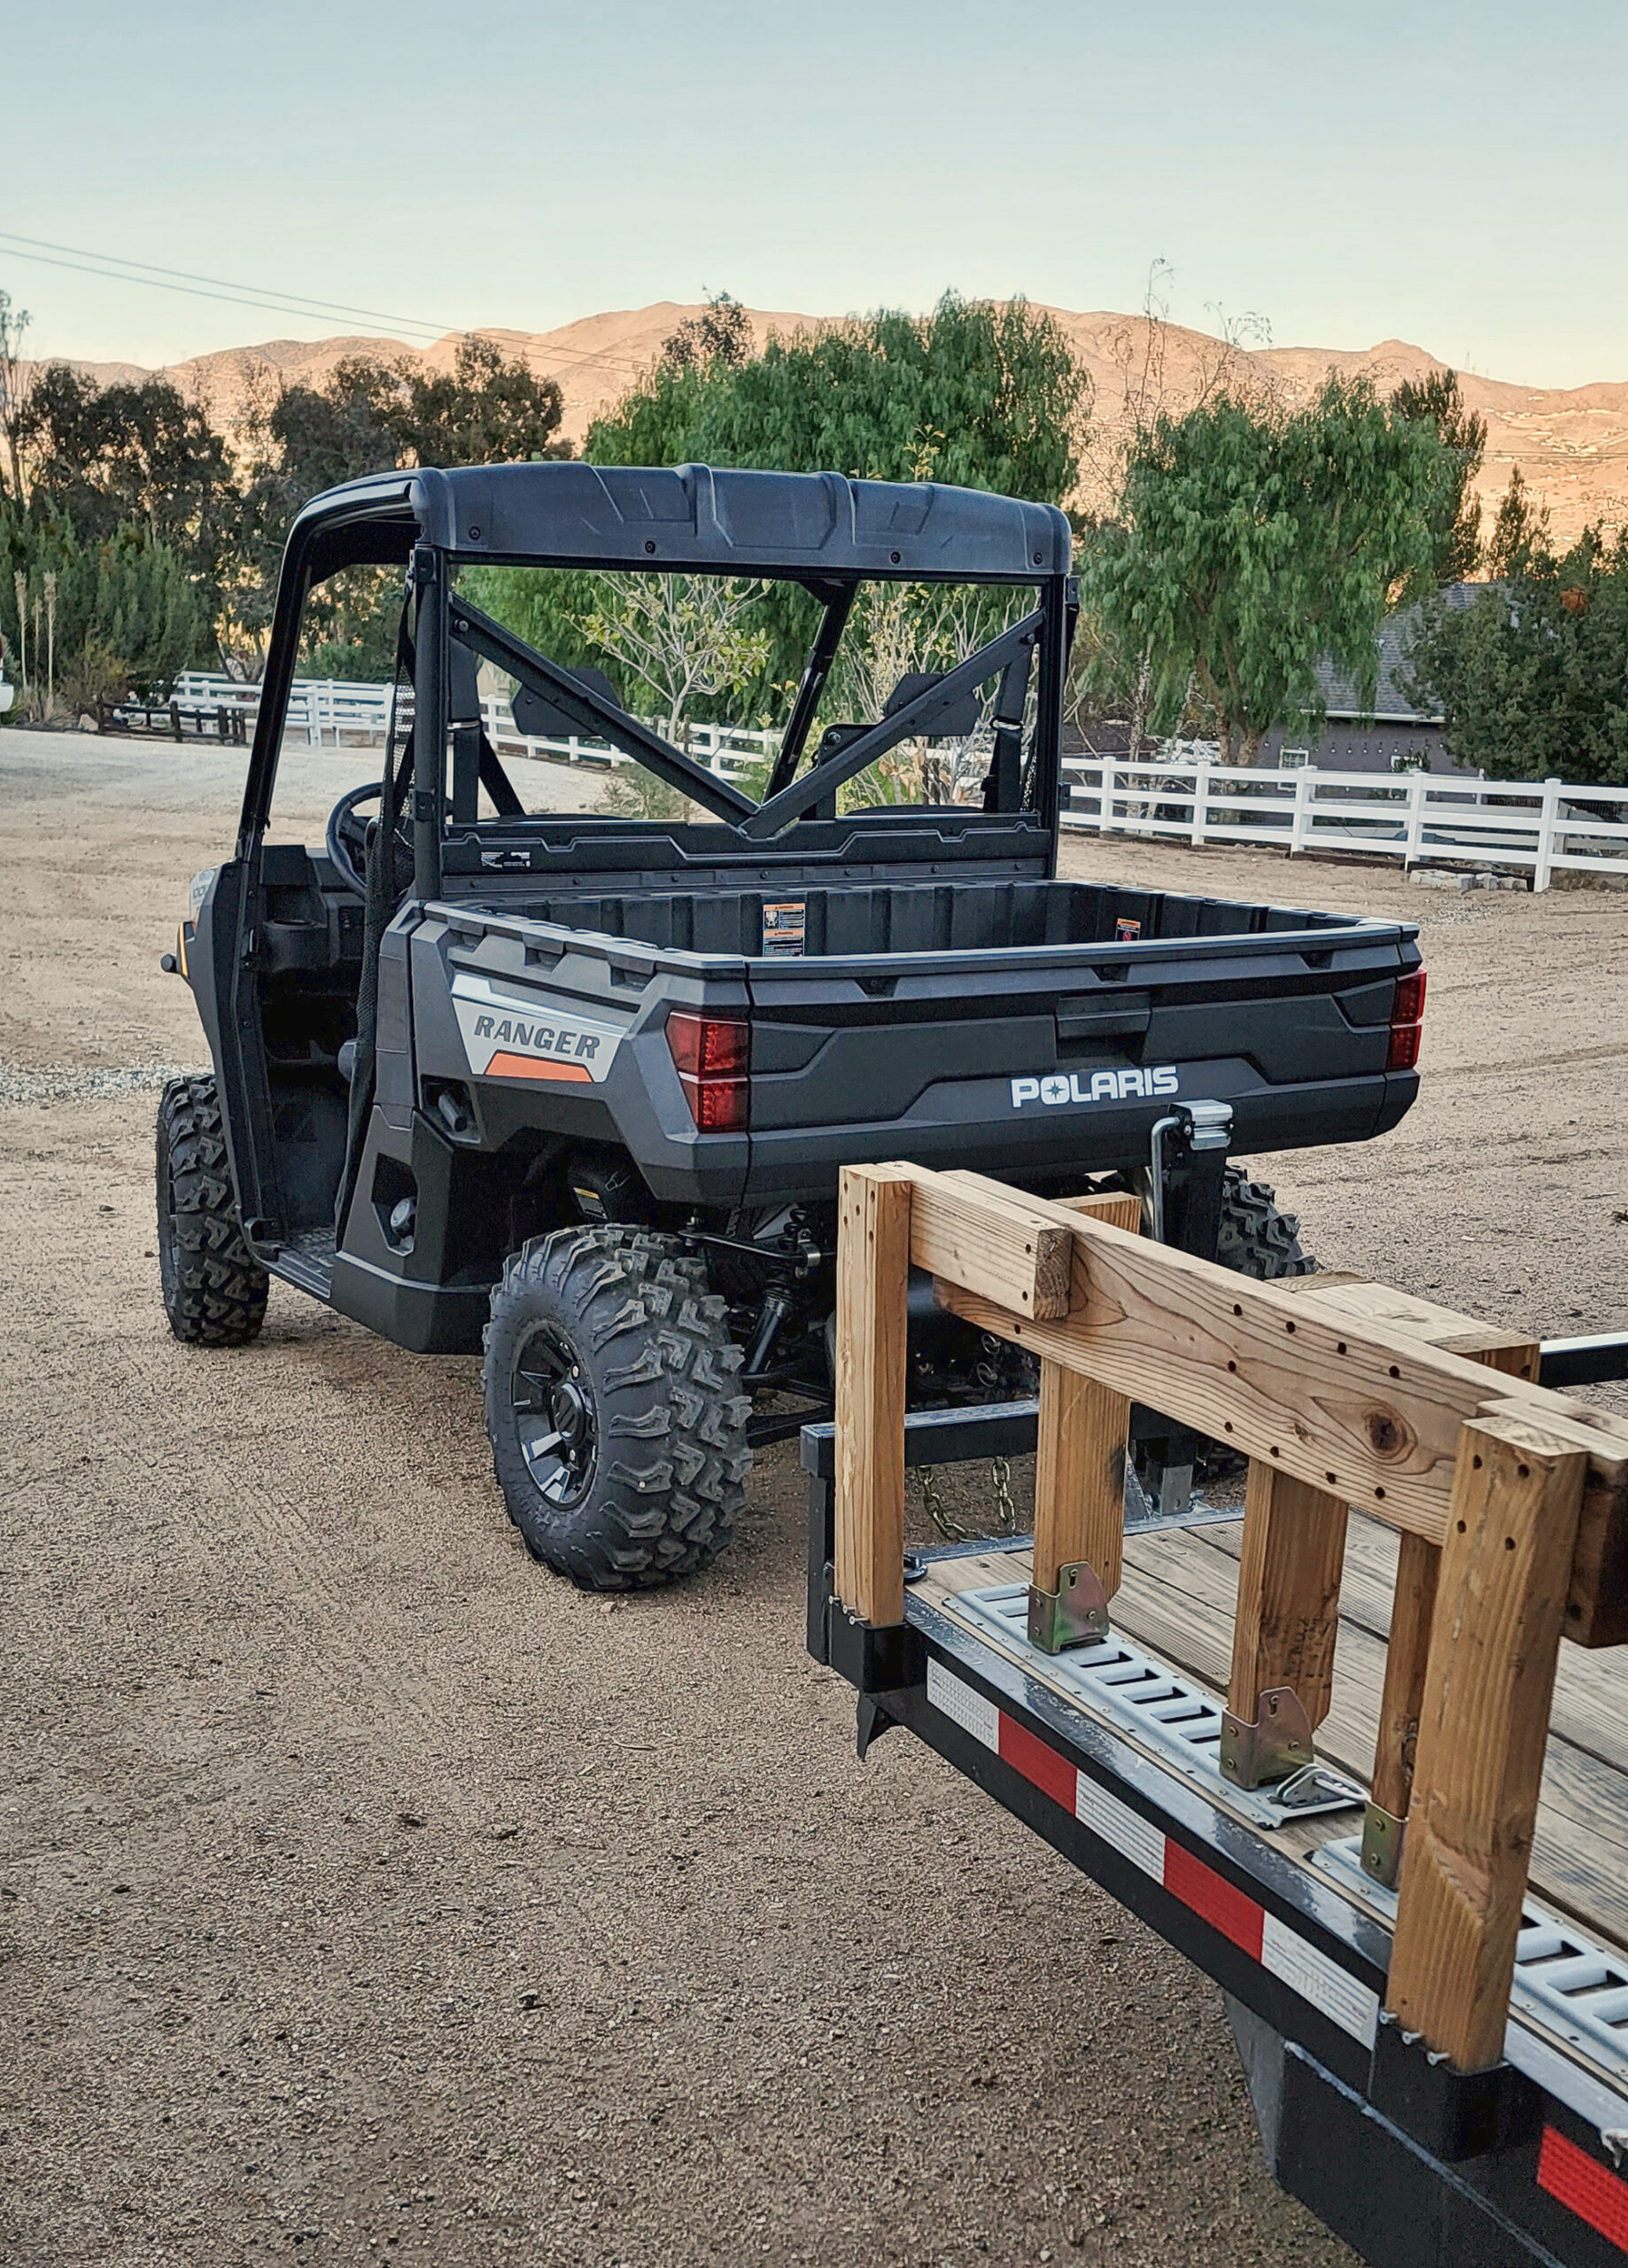 The Ranger 100 is capable of pulling small trailers.